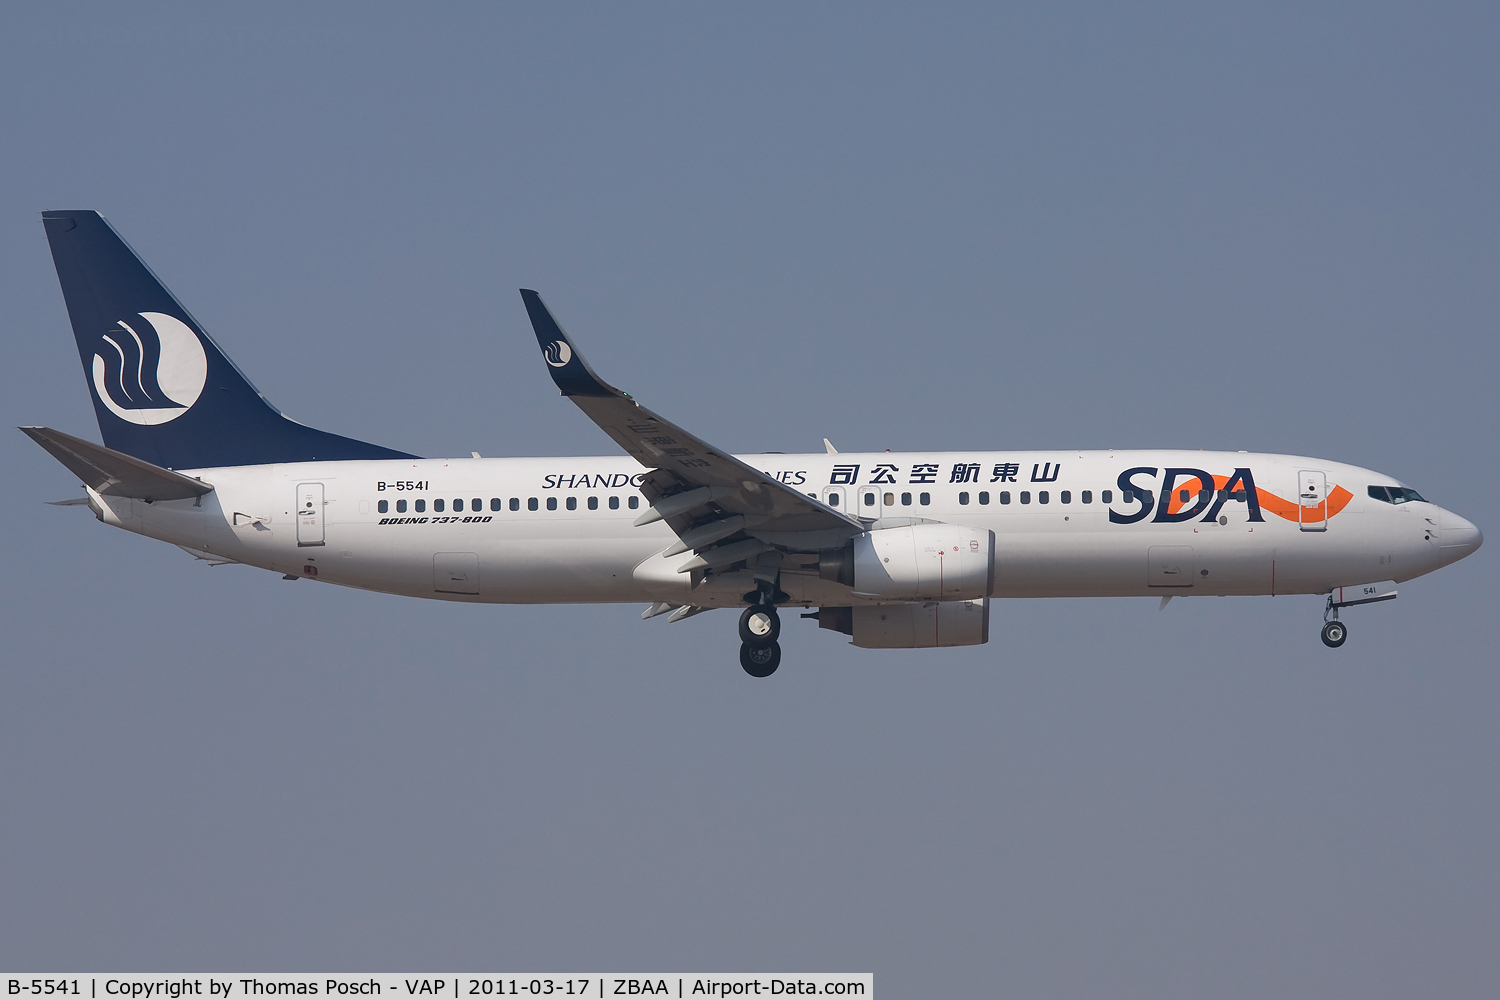 B-5541, 2010 Boeing 737-8FH C/N 40882, Shandong Airlines